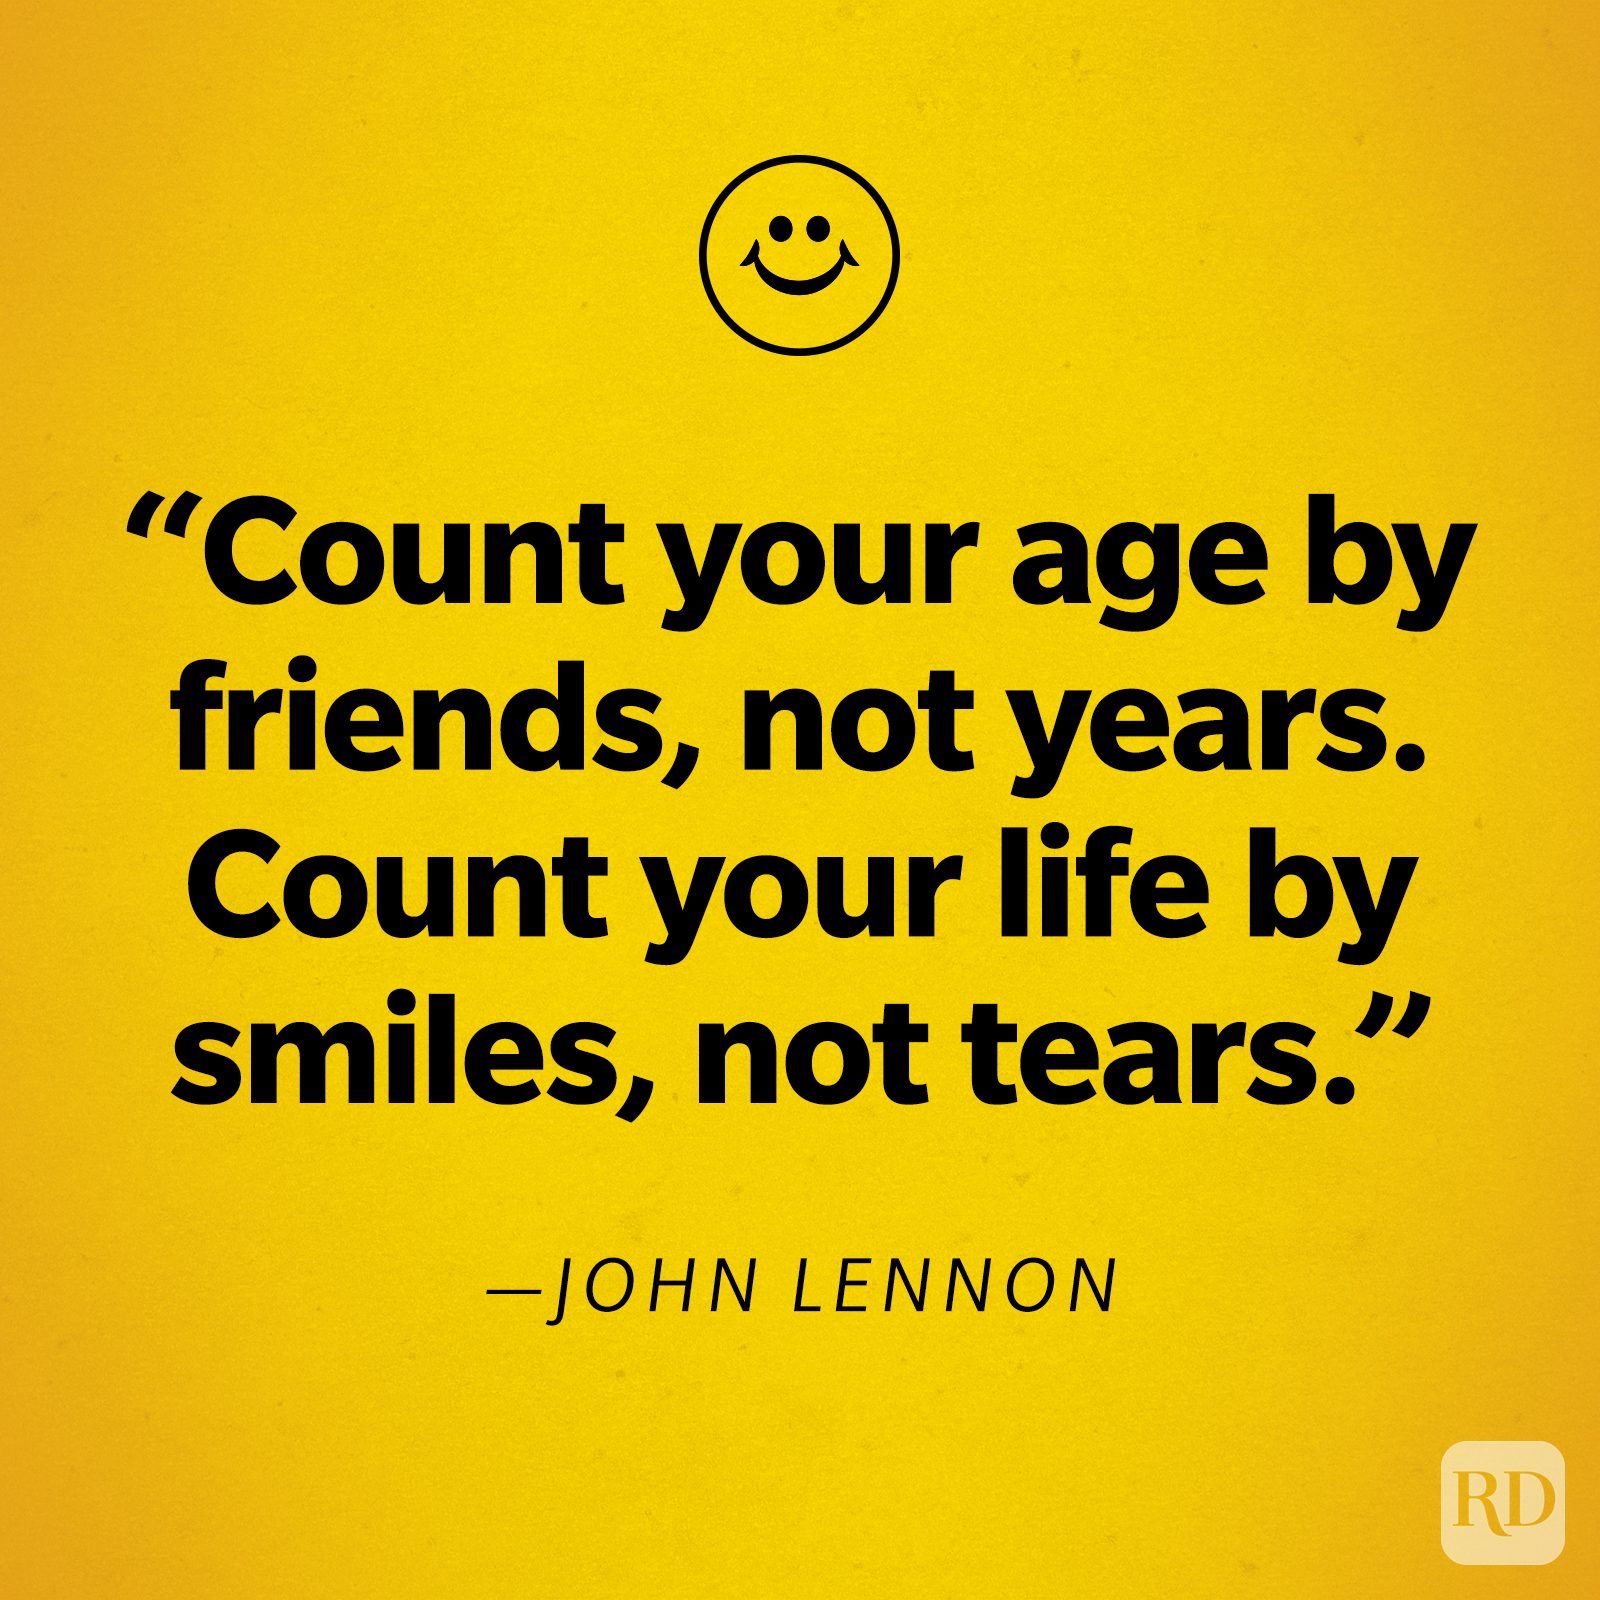 John Lennon Smile Quote "Count your age by friends, not years. Count your life by smiles, not tears."